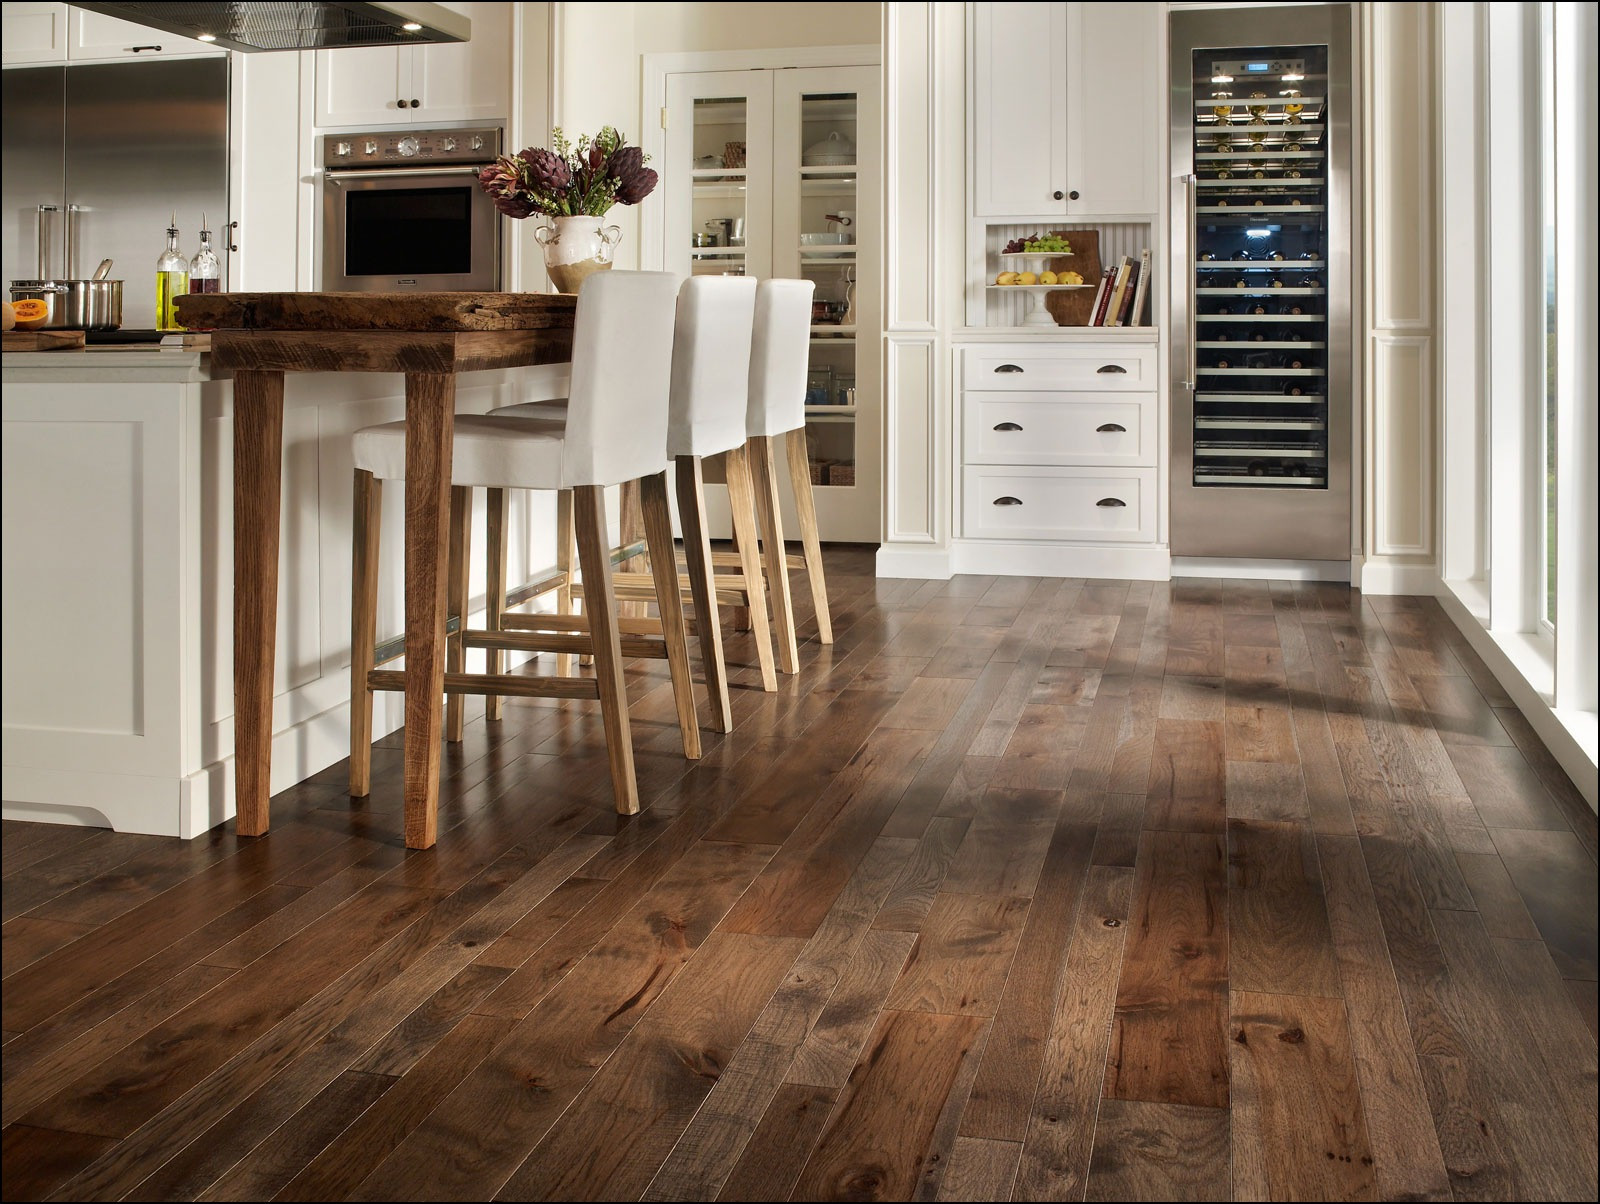 29 Nice Bamboo Hardwood Flooring Pros and Cons 2024 free download bamboo hardwood flooring pros and cons of home depot queen creek flooring ideas with home depot solid bamboo flooring photographies dark hardwood floor kitchen sensational hardwood floors in